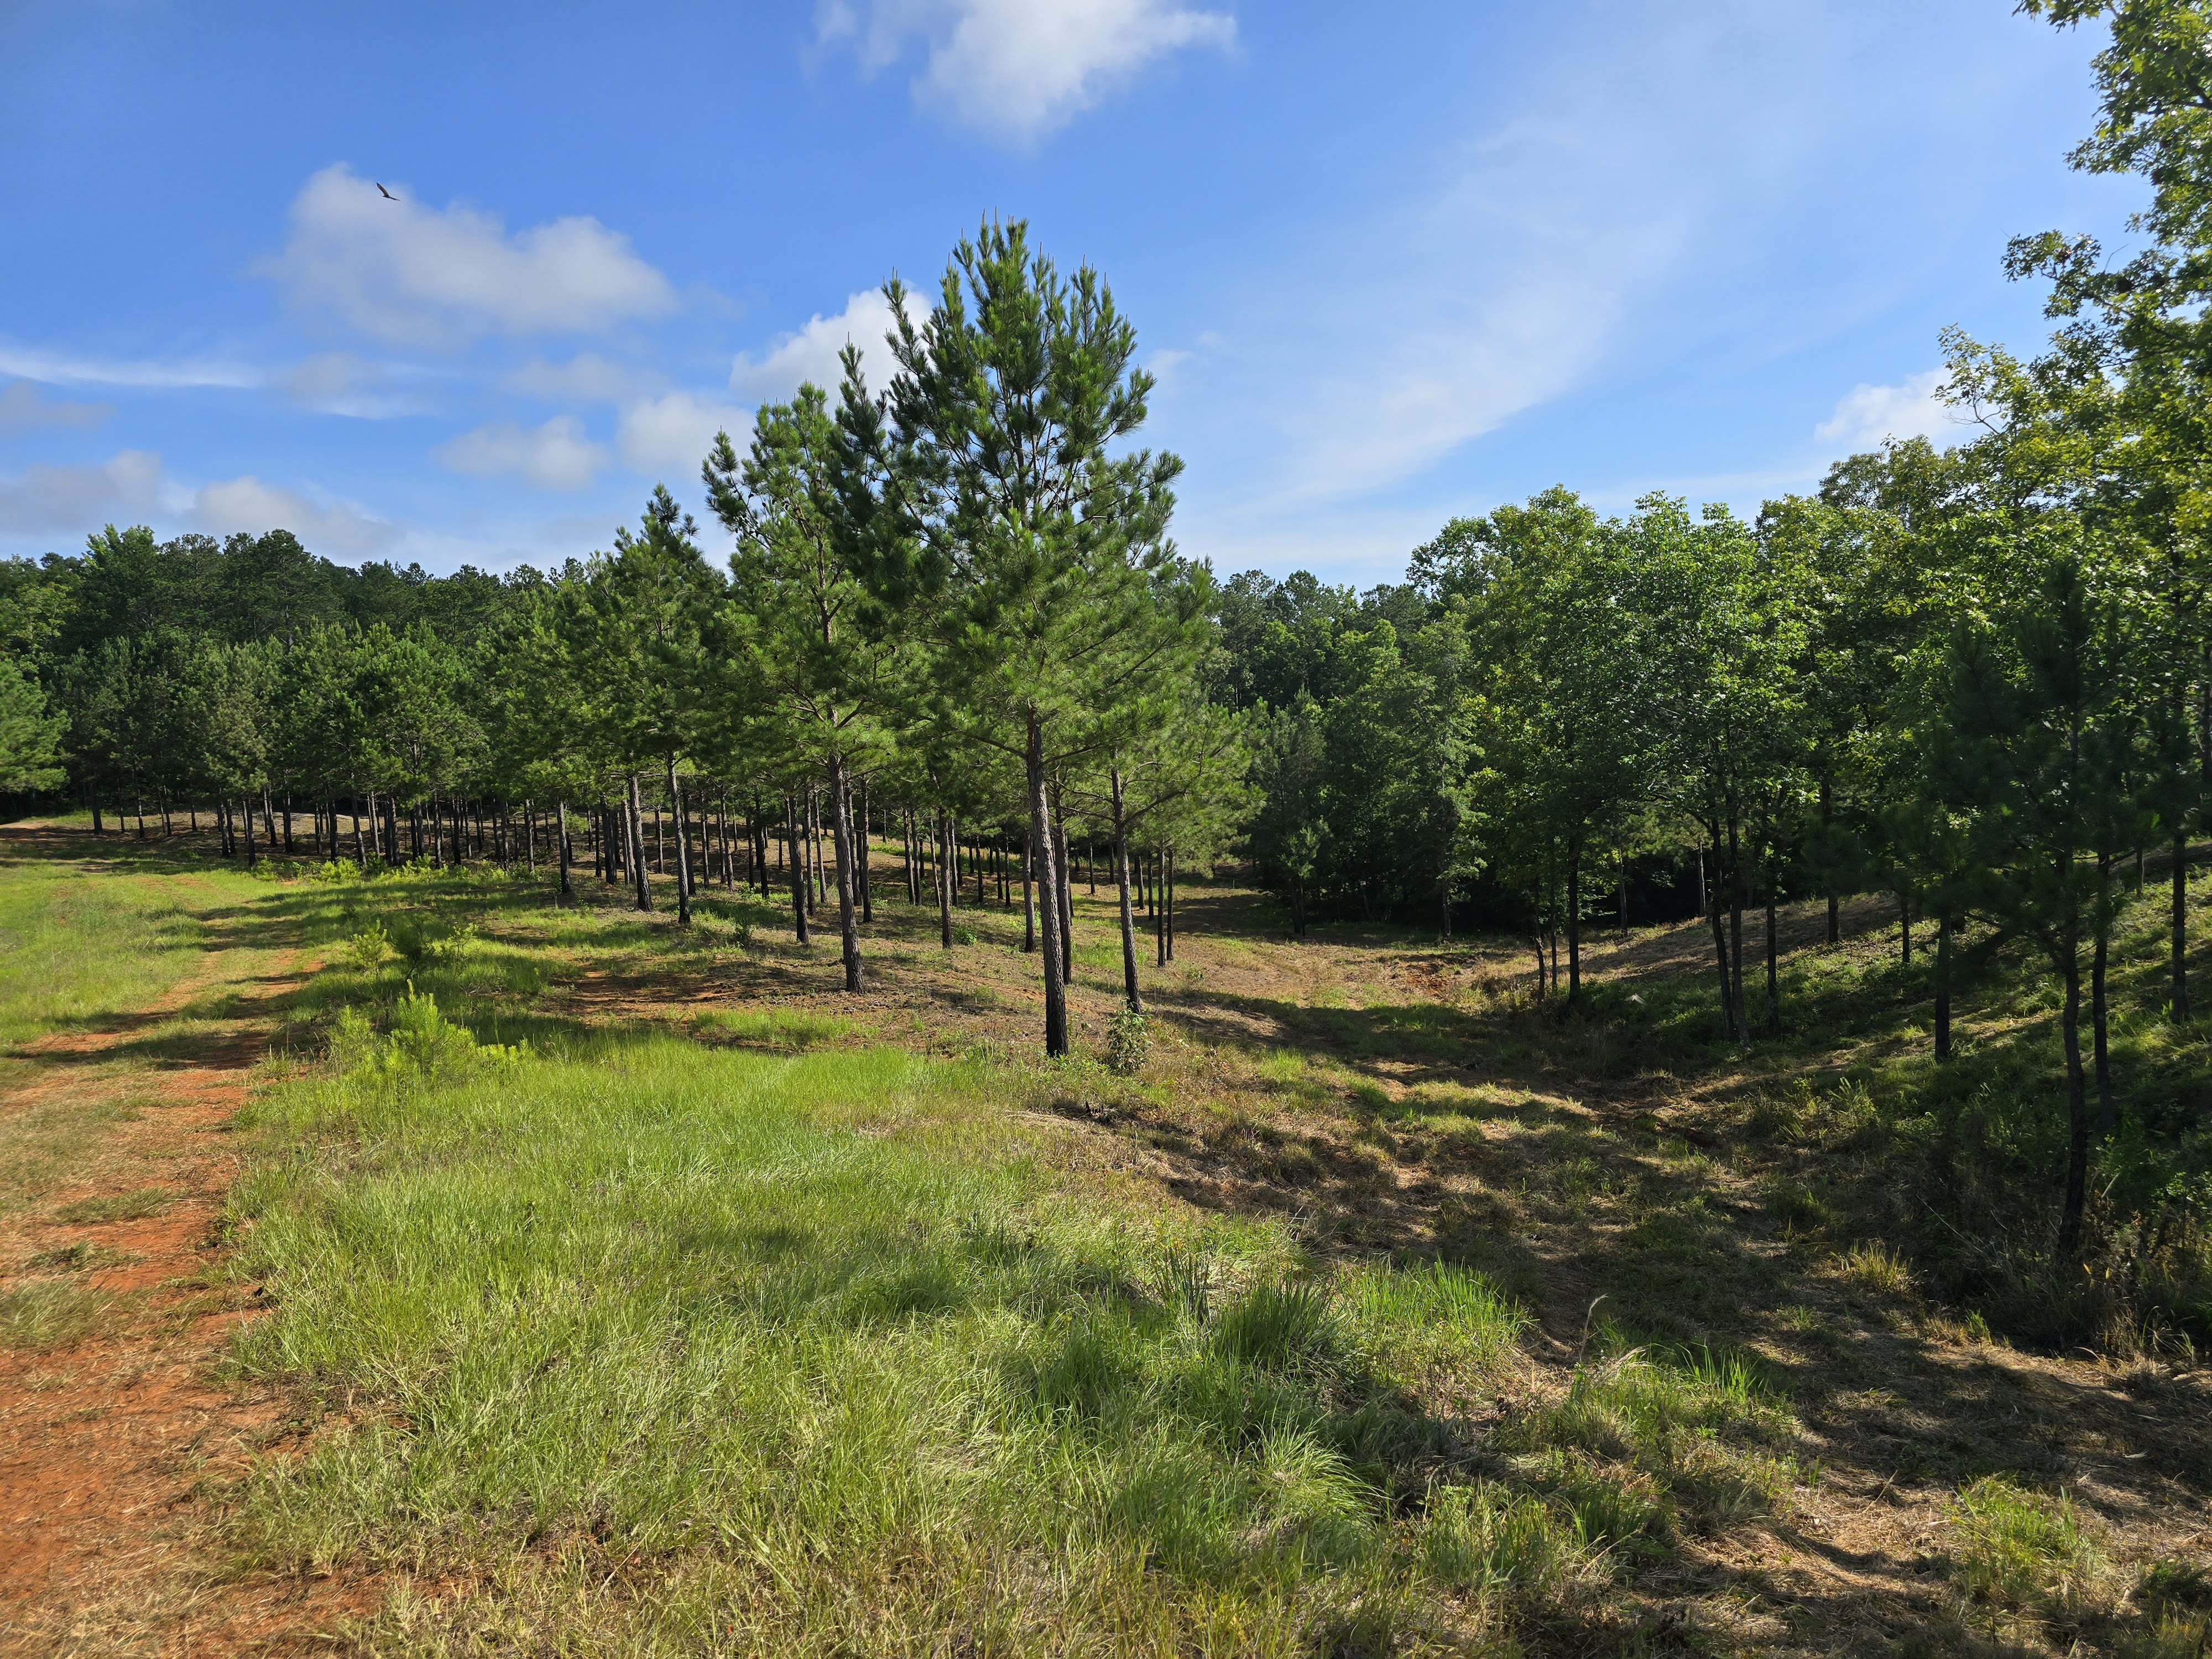 197.25 Ac Harris Co GA - So close to town, yet nothing but nature!